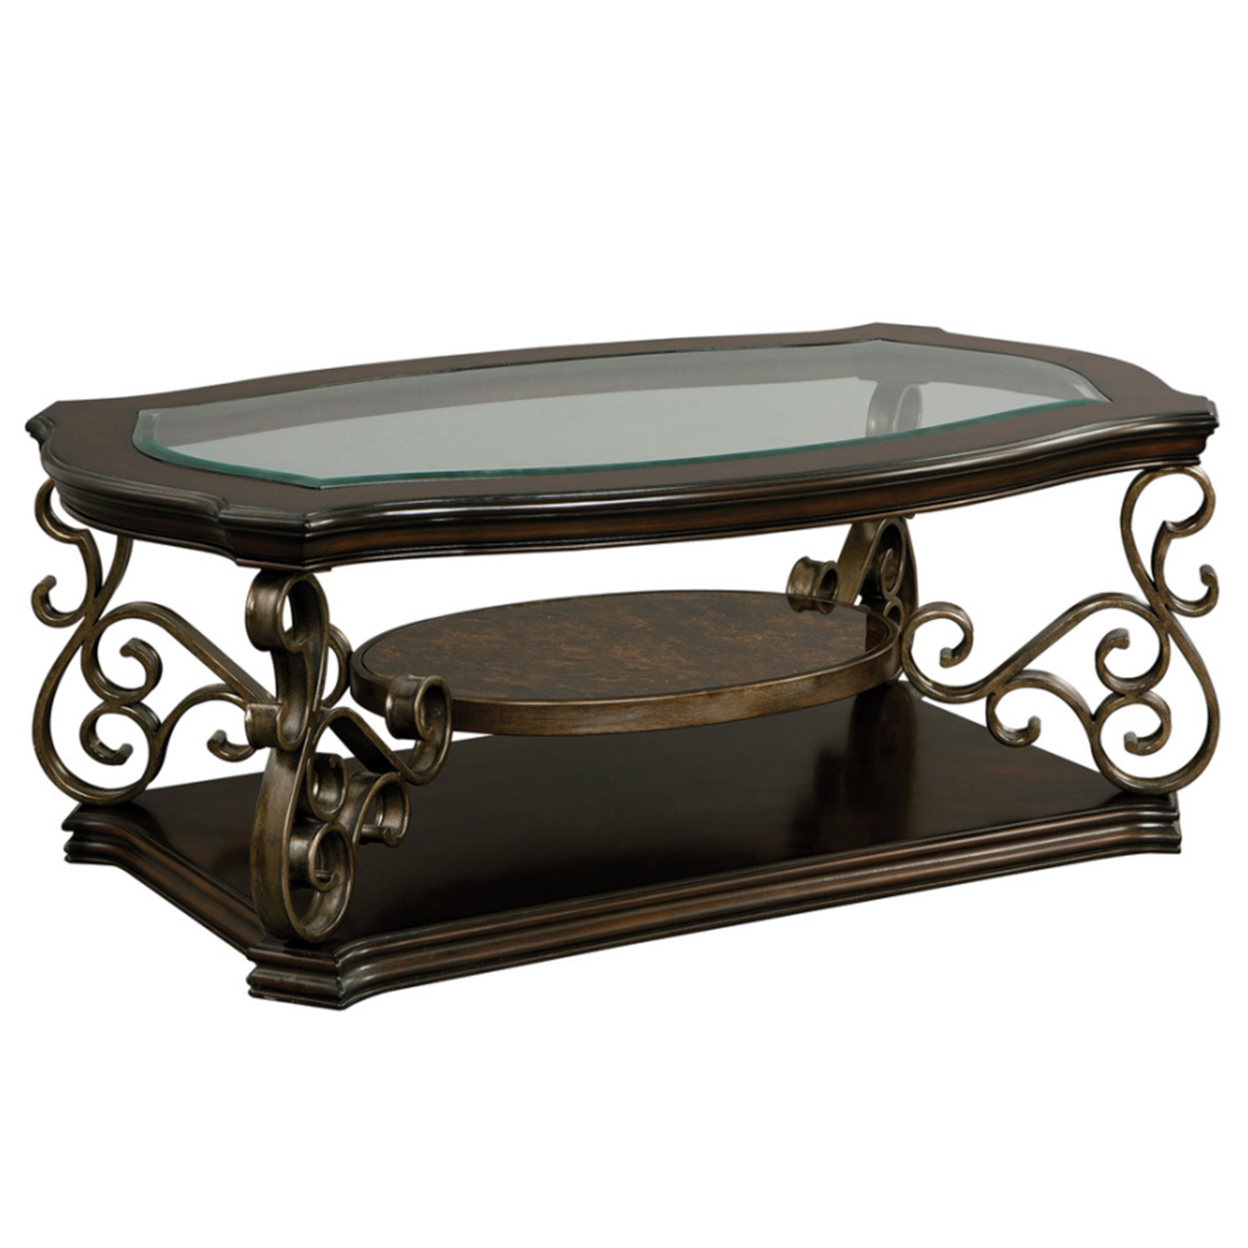 Cocktail Table With Glass Top And Scroll Accent, Brown- Saltoro Sherpi